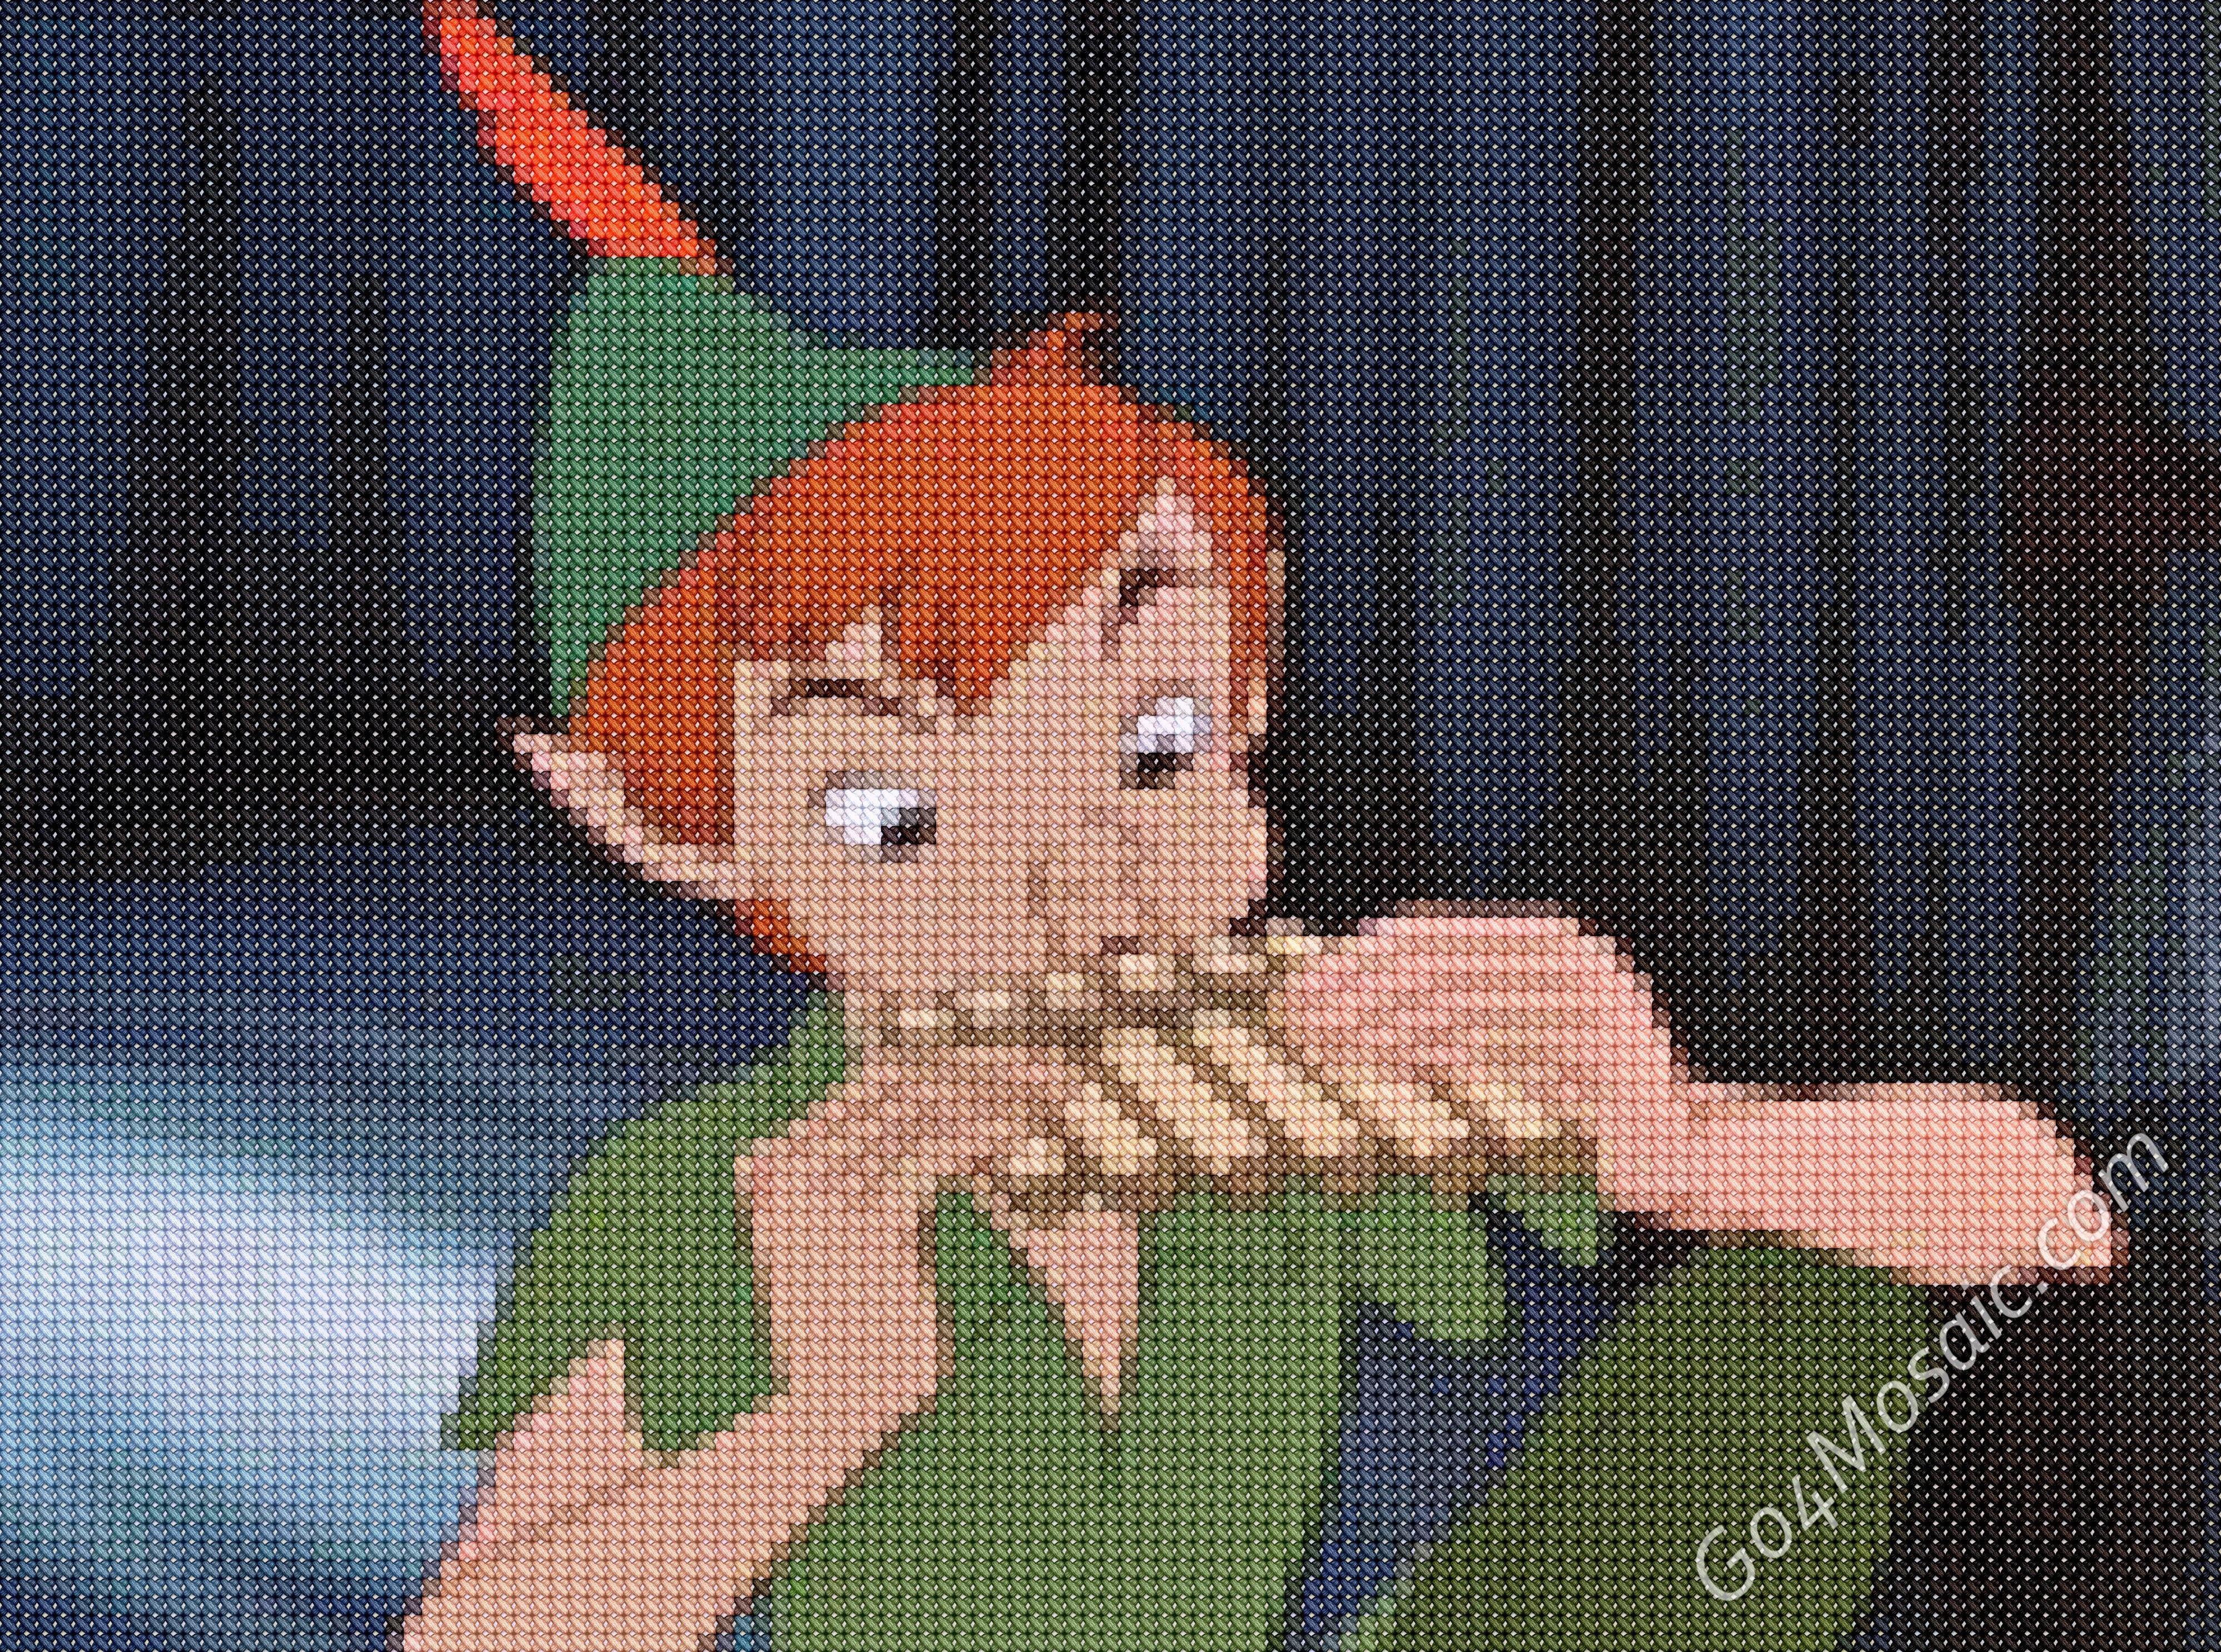 Cross-stitched Peter Pan